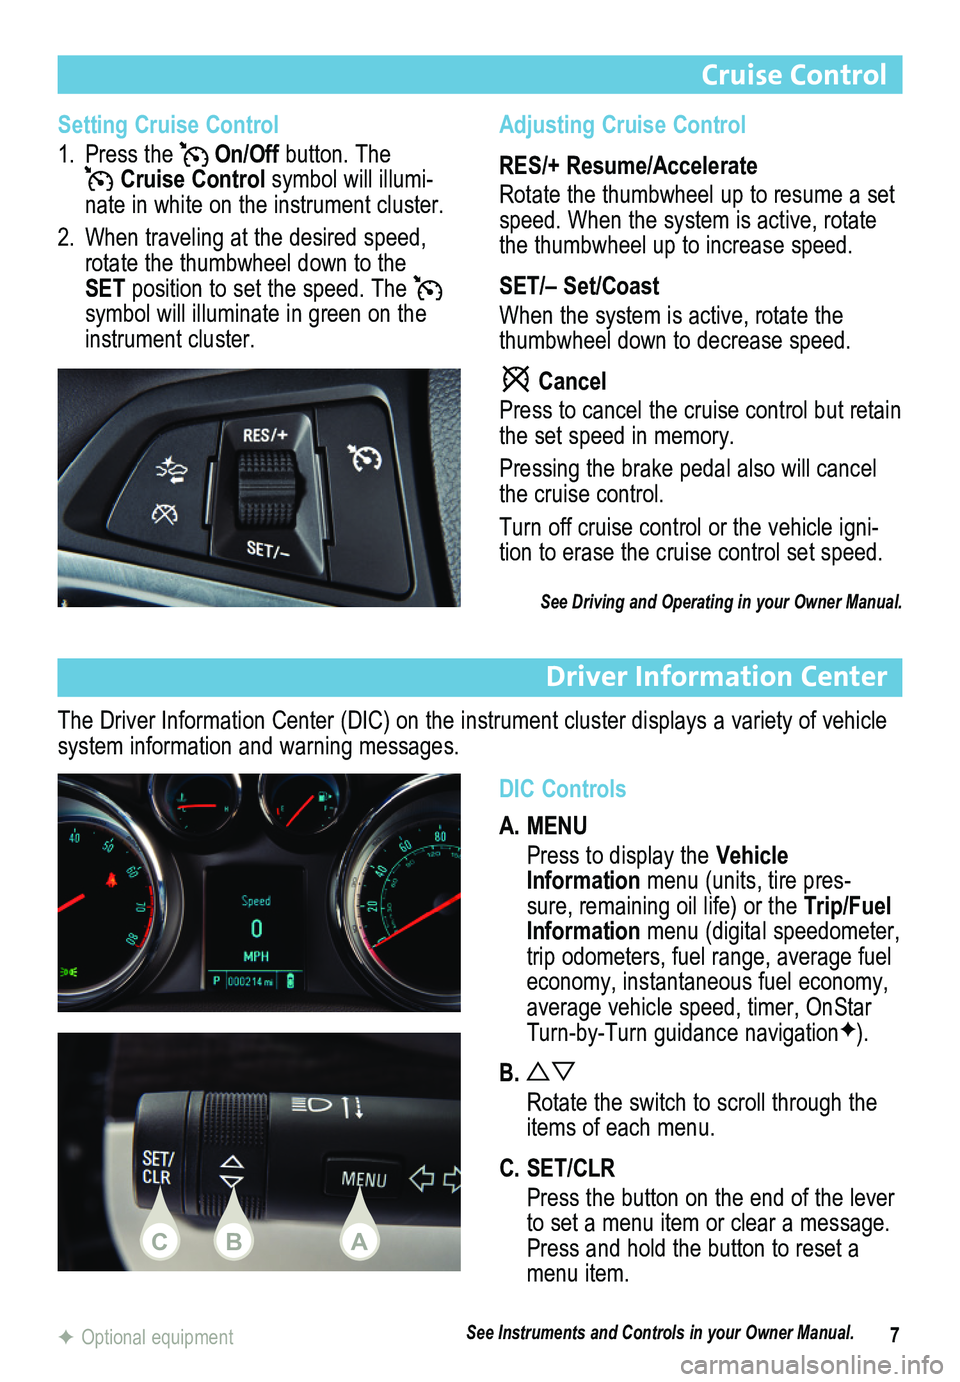 BUICK ENCORE 2015  Get To Know Guide 7
Cruise Control
Driver Information Center
DIC Controls
A. MENU
 Press to display the Vehicle Information menu (units, tire pres-sure, remaining oil life) or the Trip/Fuel Information menu (digital sp